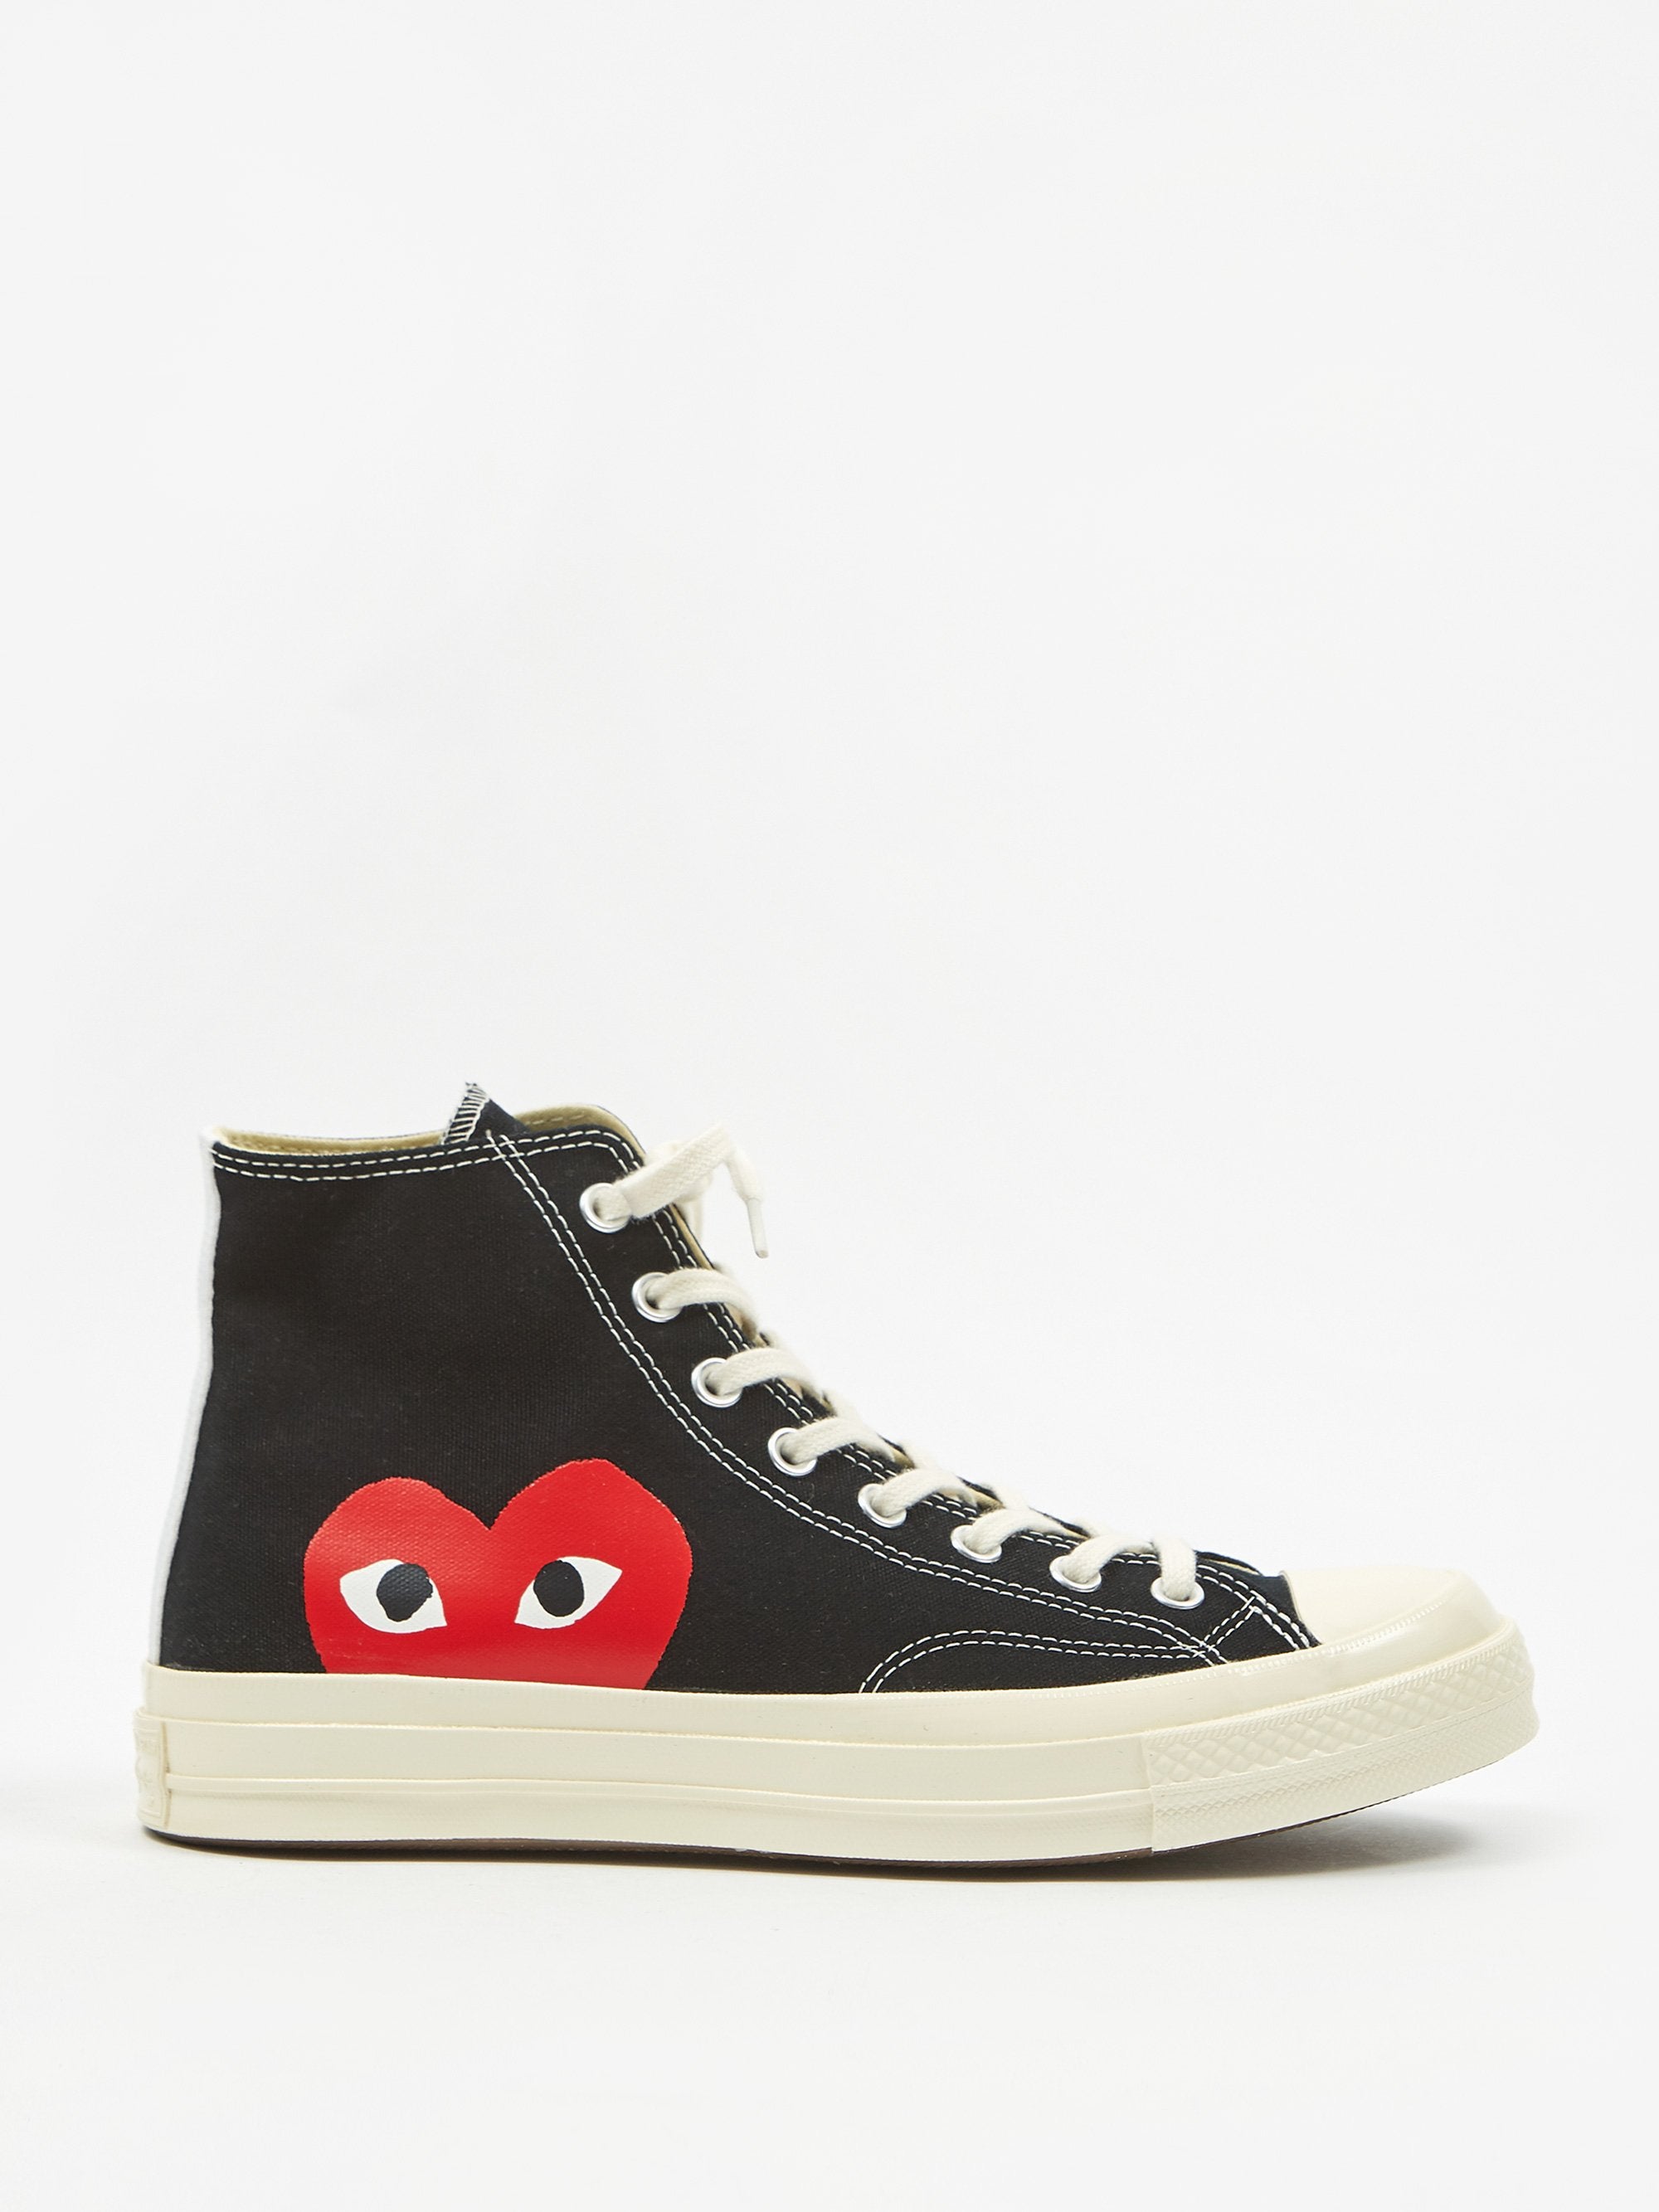 converse chuck taylor all star 70 play comme des garcons